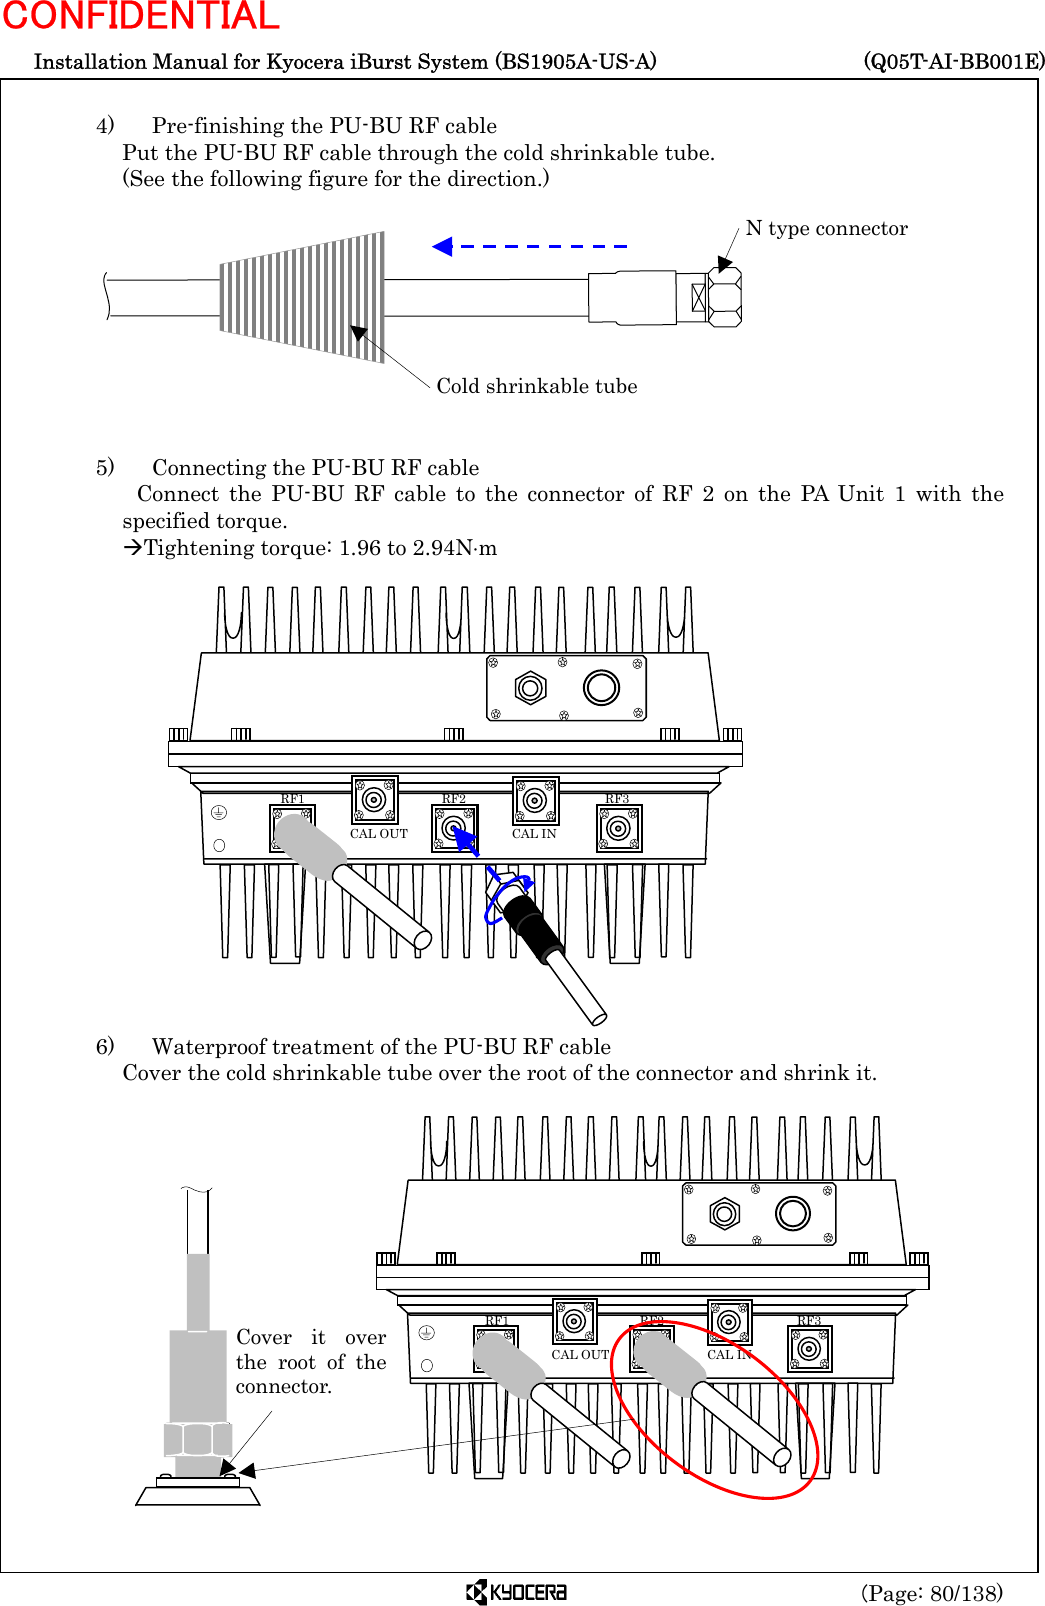  Installation Manual for Kyocera iBurst System (BS1905A-US-A)     (Q05T-AI-BB001E) (Page: 80/138) CONFIDENTIAL  4)    Pre-finishing the PU-BU RF cable Put the PU-BU RF cable through the cold shrinkable tube.   (See the following figure for the direction.)           5)    Connecting the PU-BU RF cable  Connect the PU-BU RF cable to the connector of RF 2 on the PA Unit 1 with the specified torque. ÆTightening torque: 1.96 to 2.94N⋅m                   6)    Waterproof treatment of the PU-BU RF cable Cover the cold shrinkable tube over the root of the connector and shrink it.                 Cold shrinkable tube N type connector   RF3 RF2 RF1 CAL OUT  CAL IN Cover it overthe root of theconnector.  RF3 RF2 RF1 CAL OUT  CAL IN 